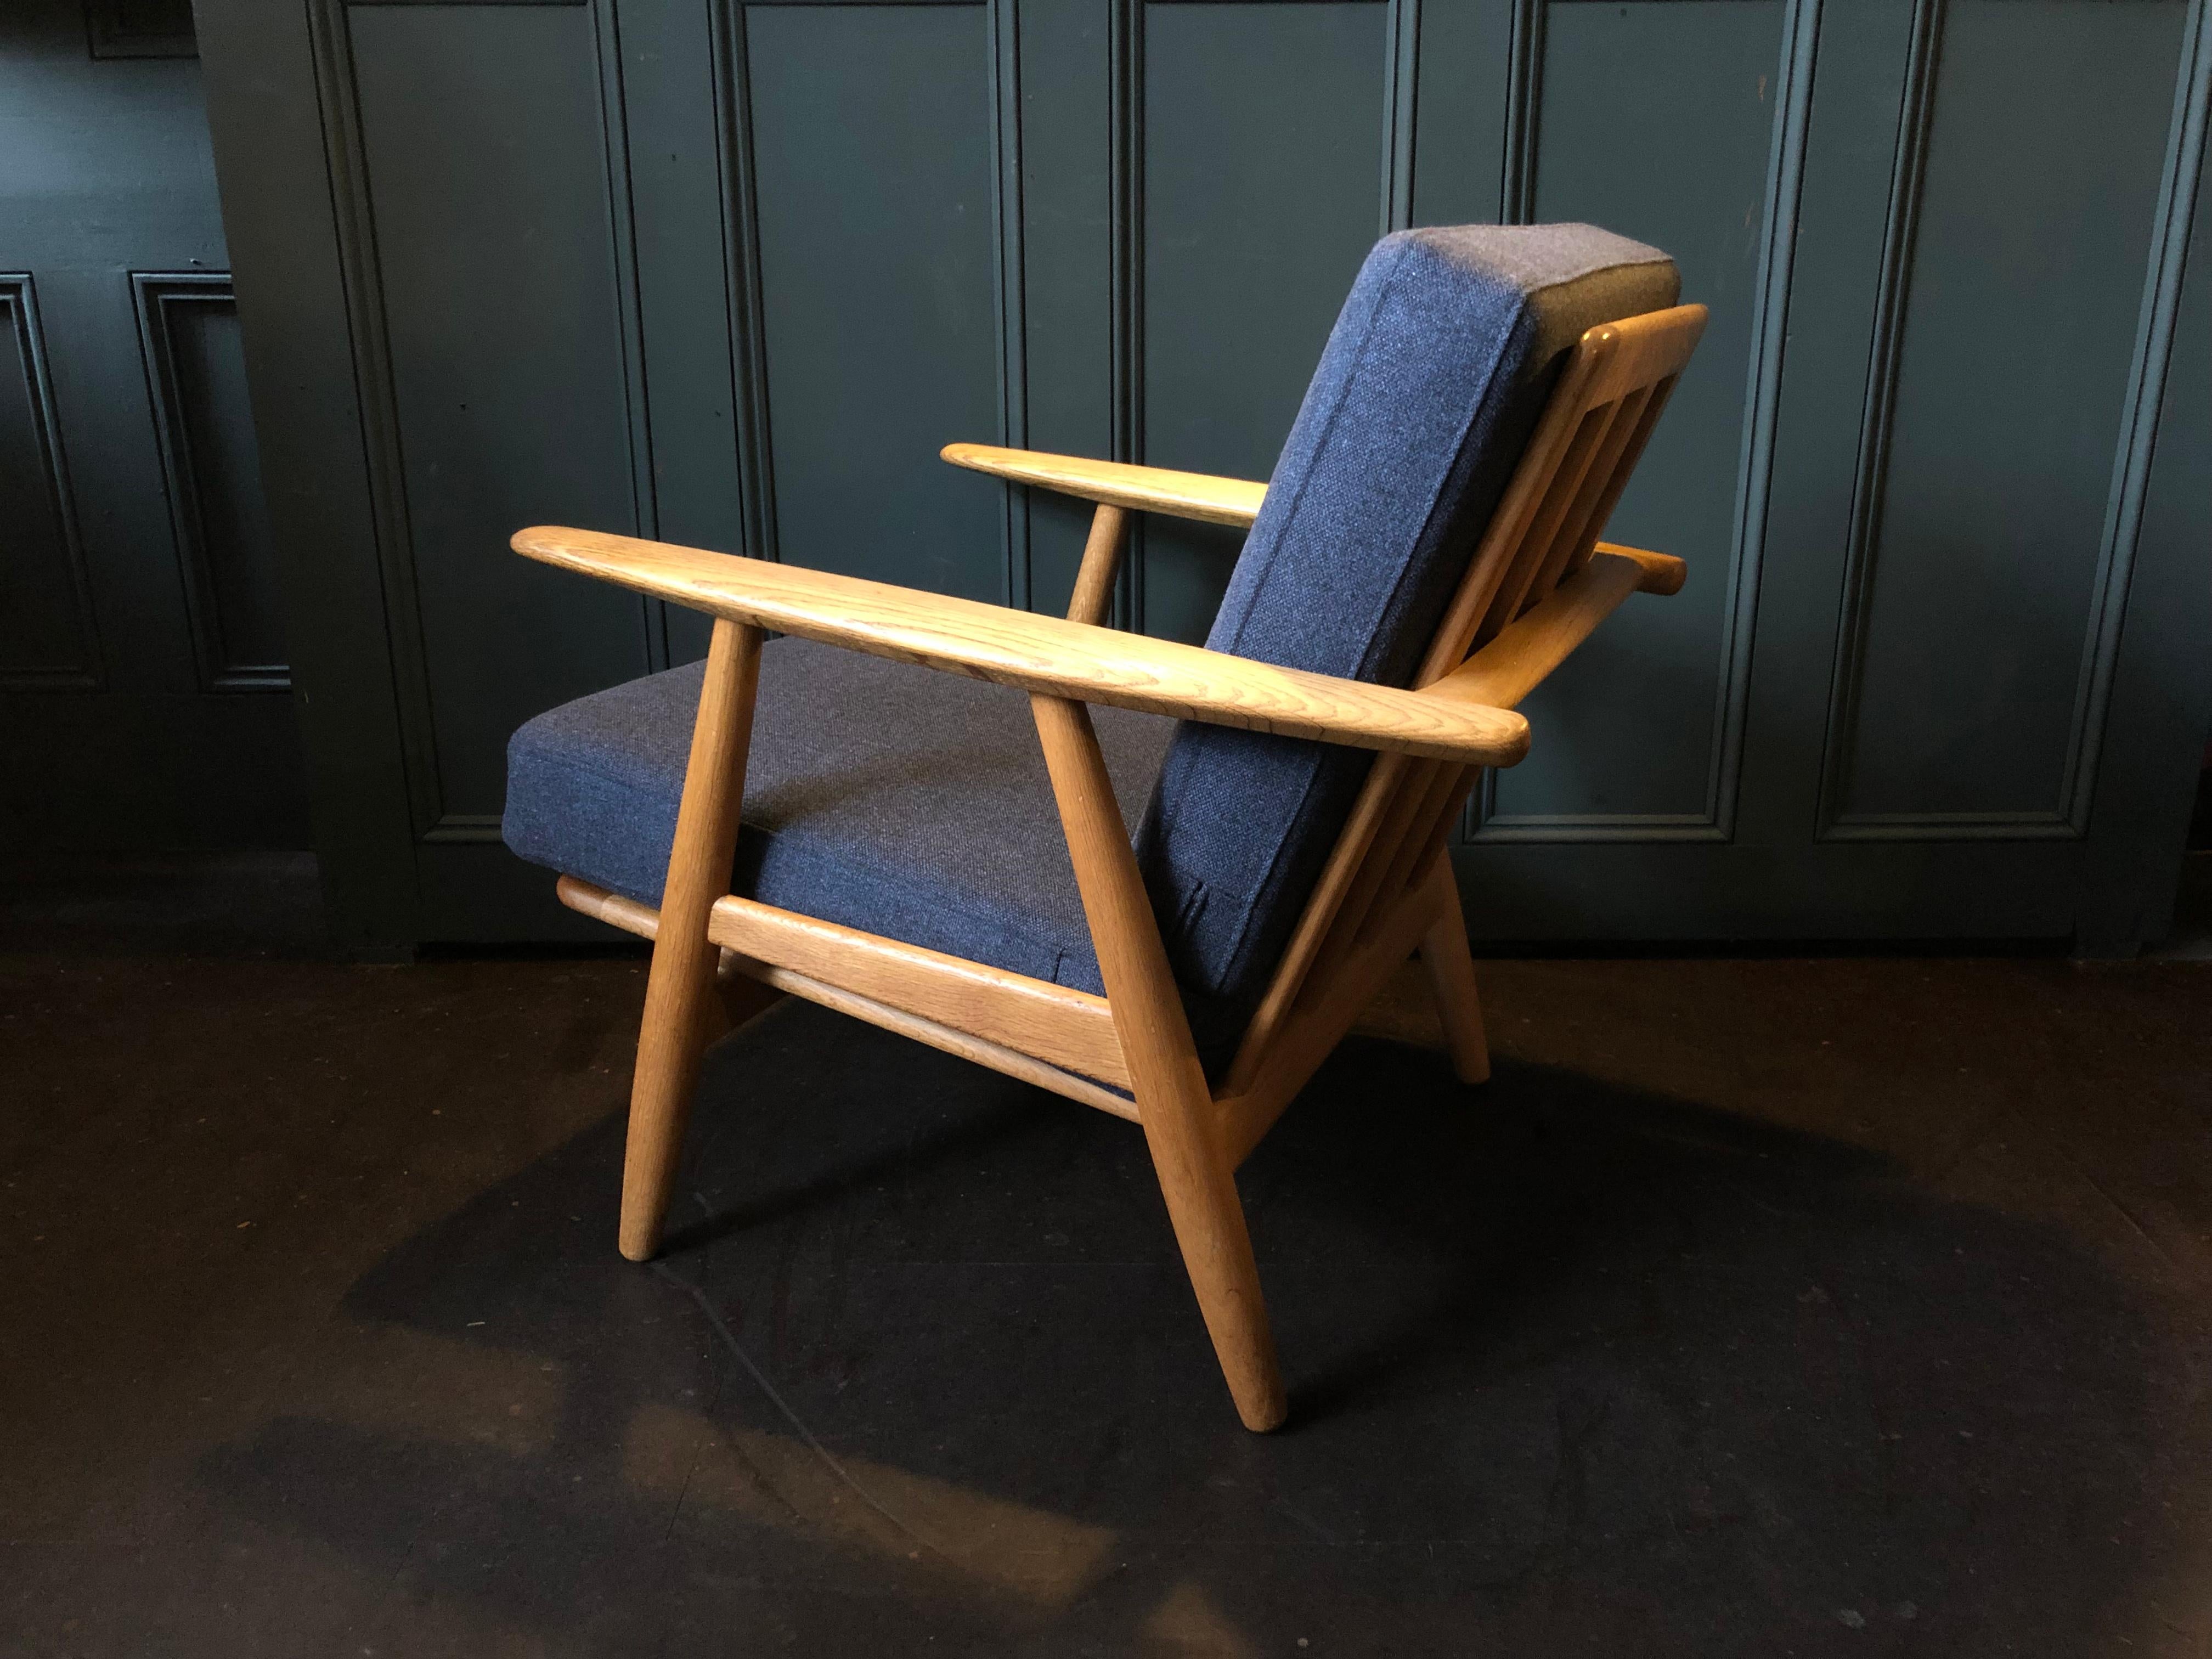 Original Midcentury 1950s Hans J Wegner ge240 cigar chair. Hans Wegner Footstools are also in stock if required. These are original 1950s models from GETAMA with makers and designers marks still intact. Constructed from European white oak. A truly